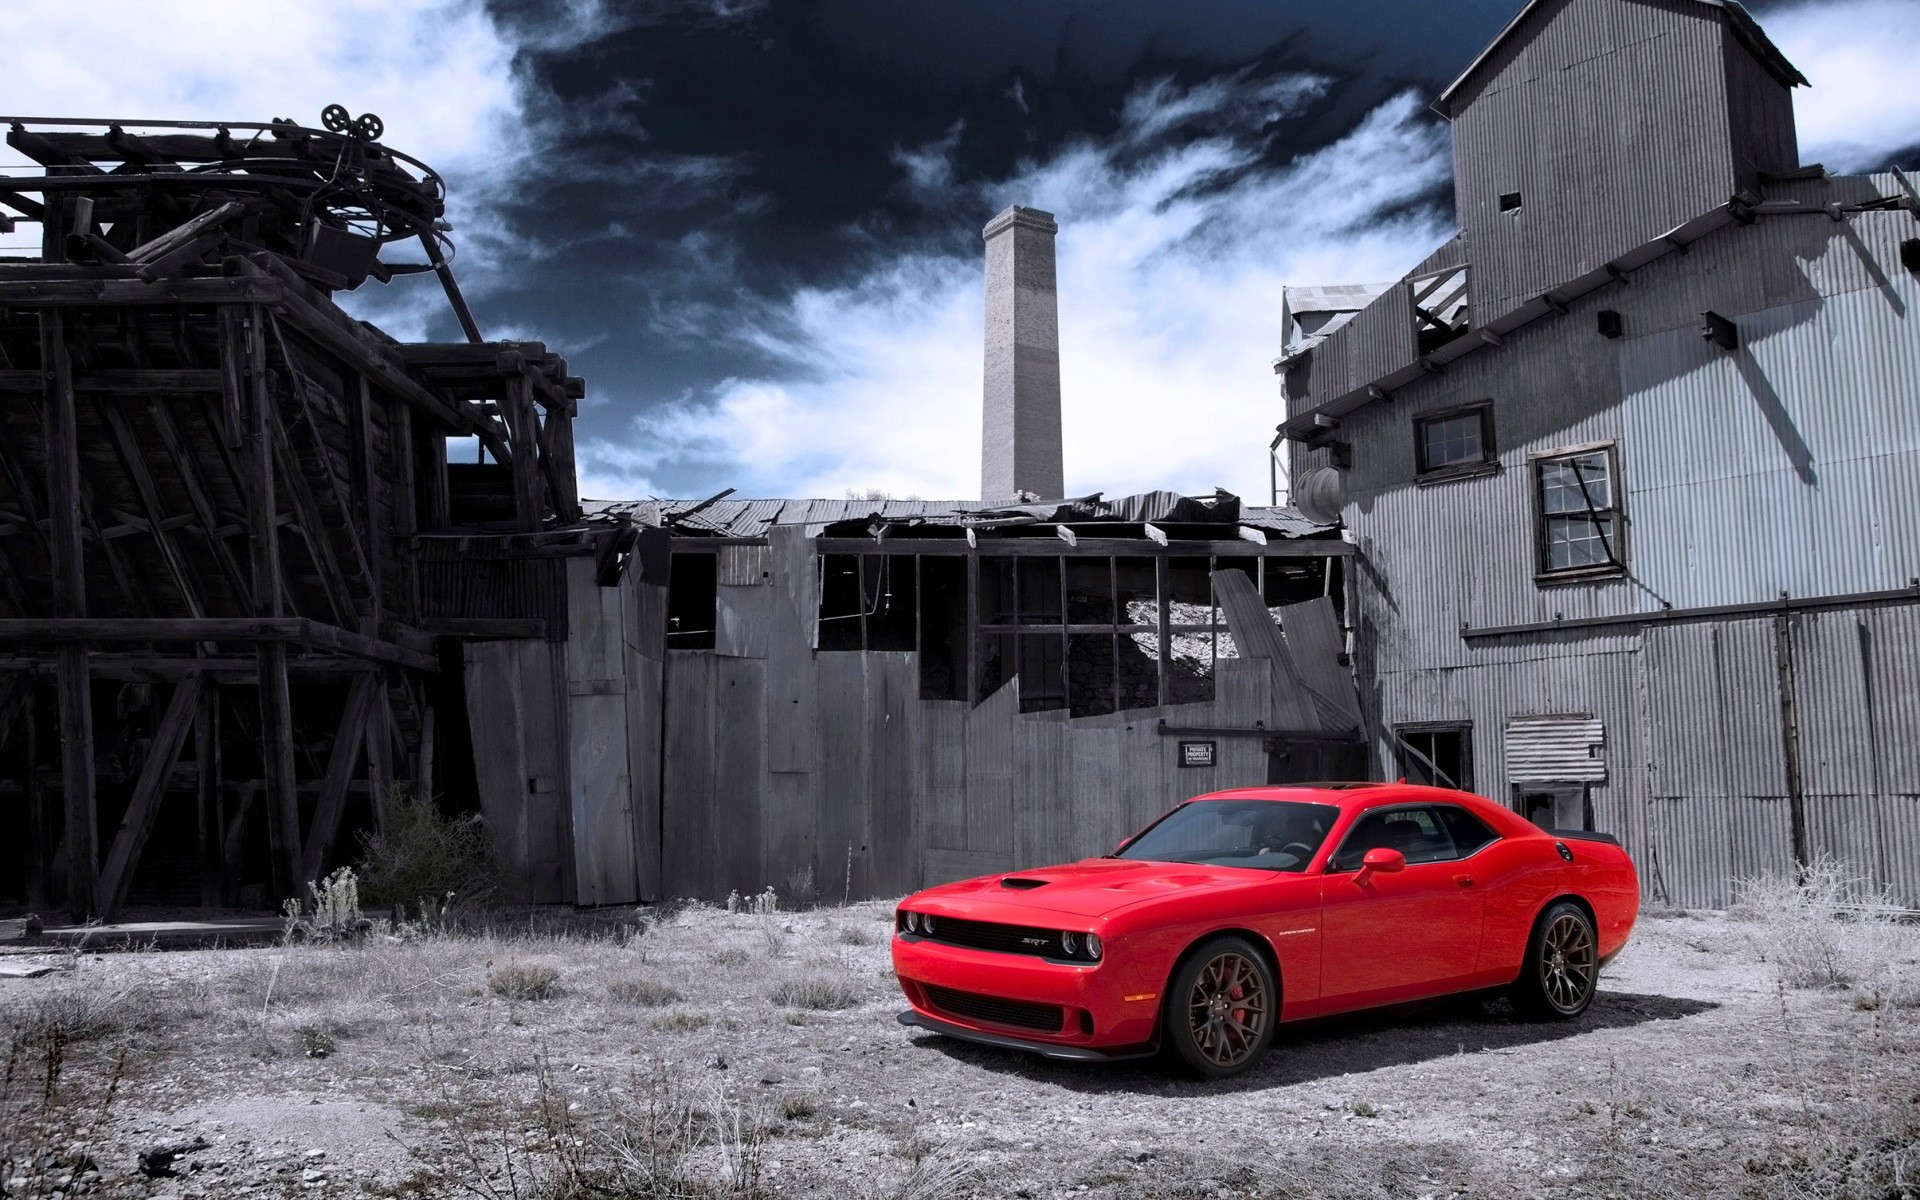 General 1920x1200 Dodge Challenger Dodge red cars vehicle muscle cars American cars Stellantis V8 engine